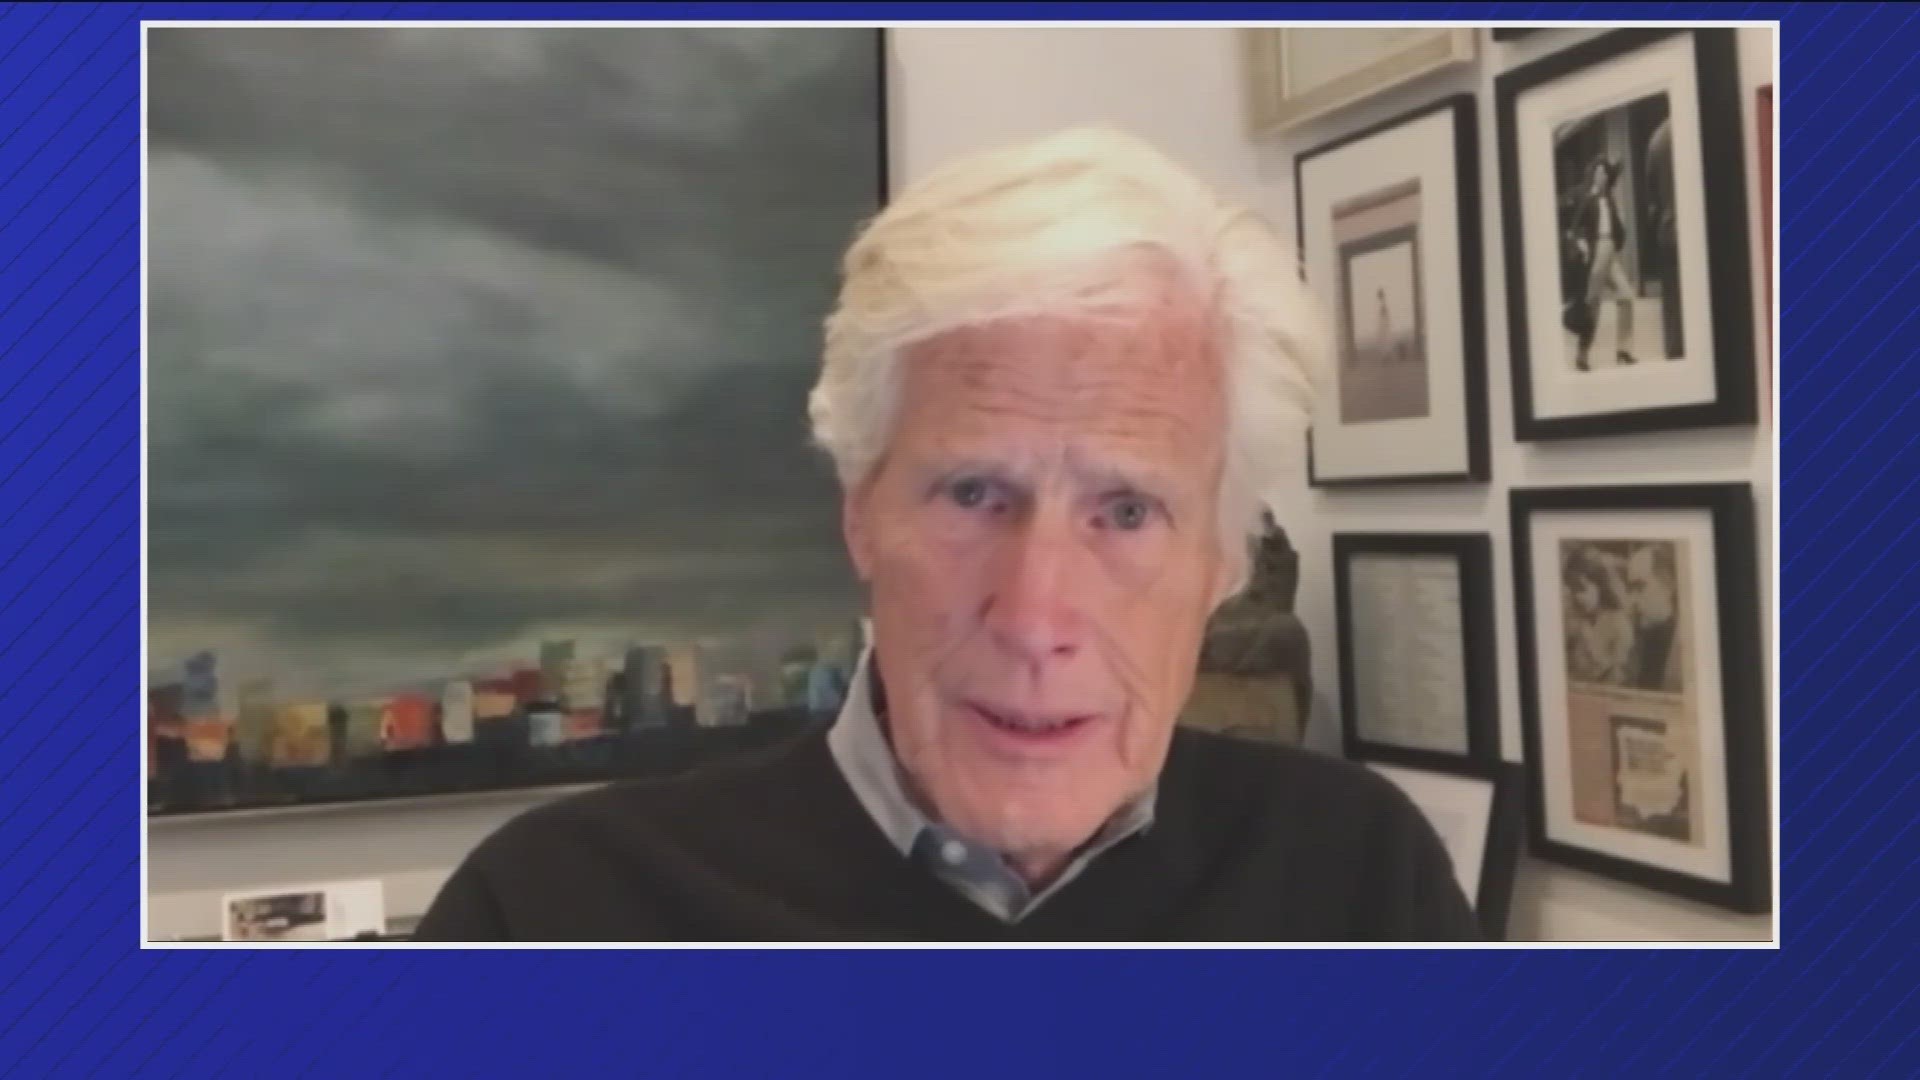 Keith Morrison spoke with KTVB ahead of Friday's Dateline special "The Killings on King Road" about NBC's reporting to uncover new information in the case.